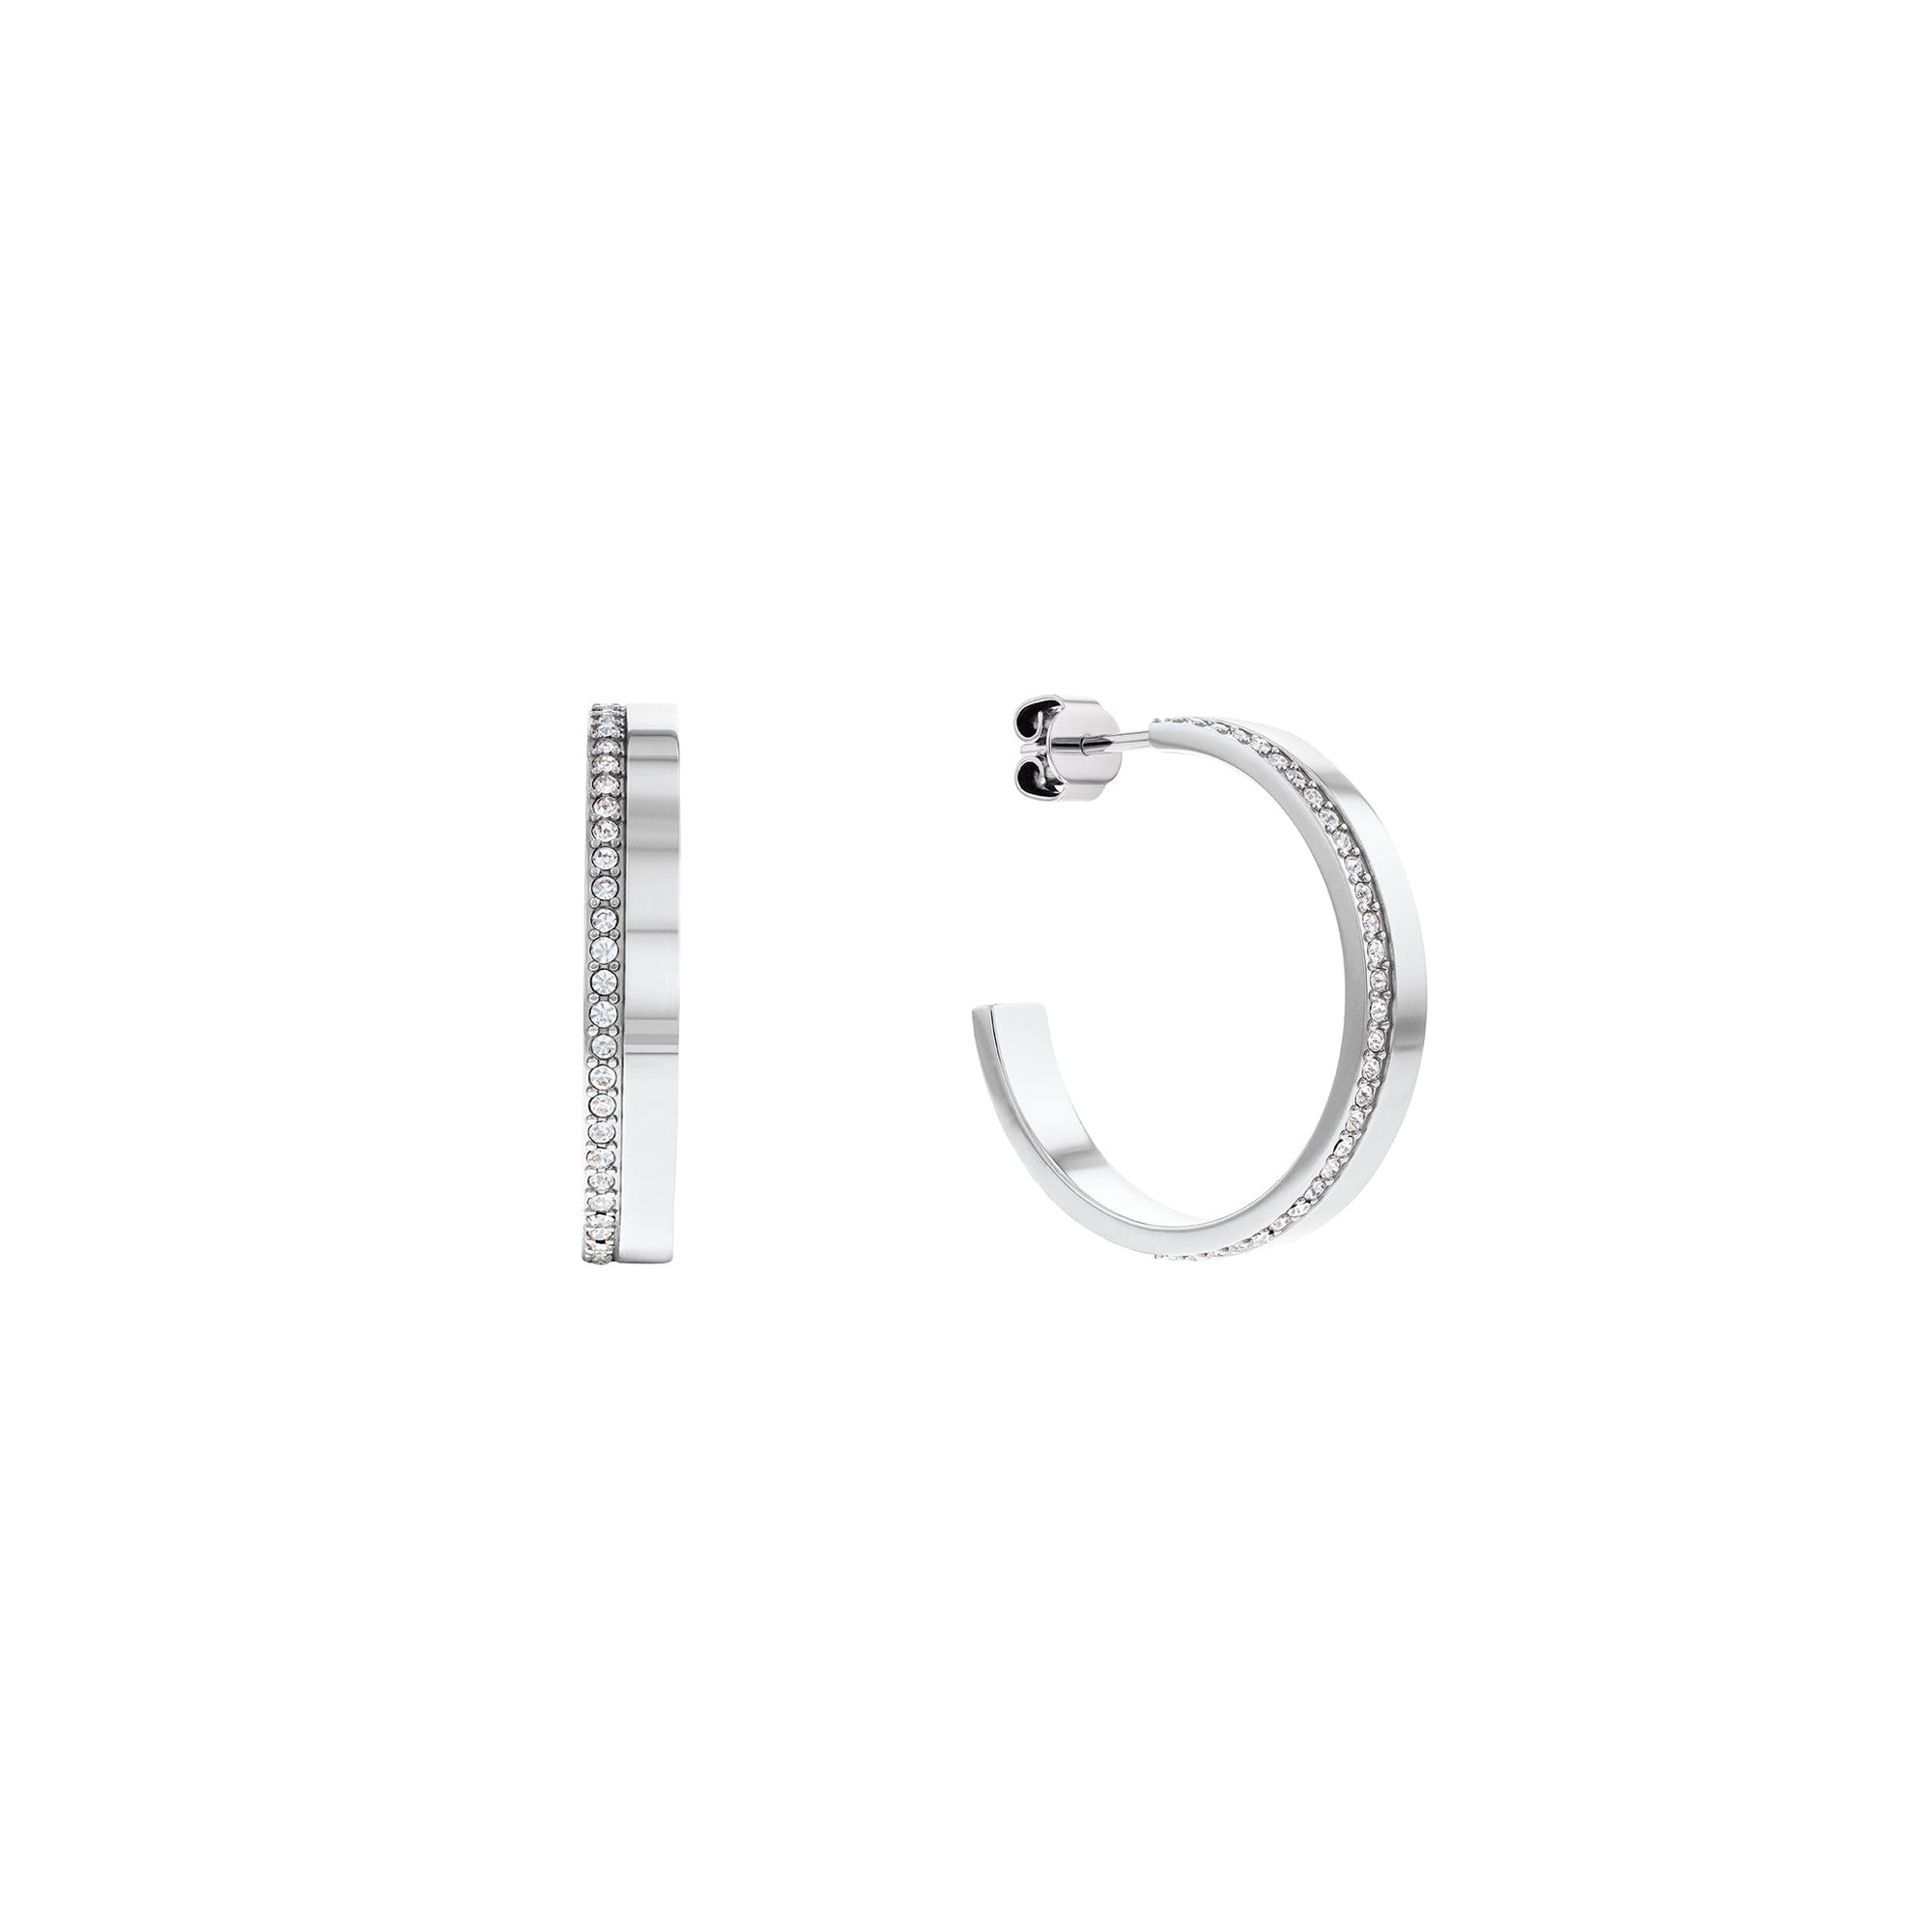 Calvin Klein Jewellery Stainless Steel with Crystals Women's Earrings